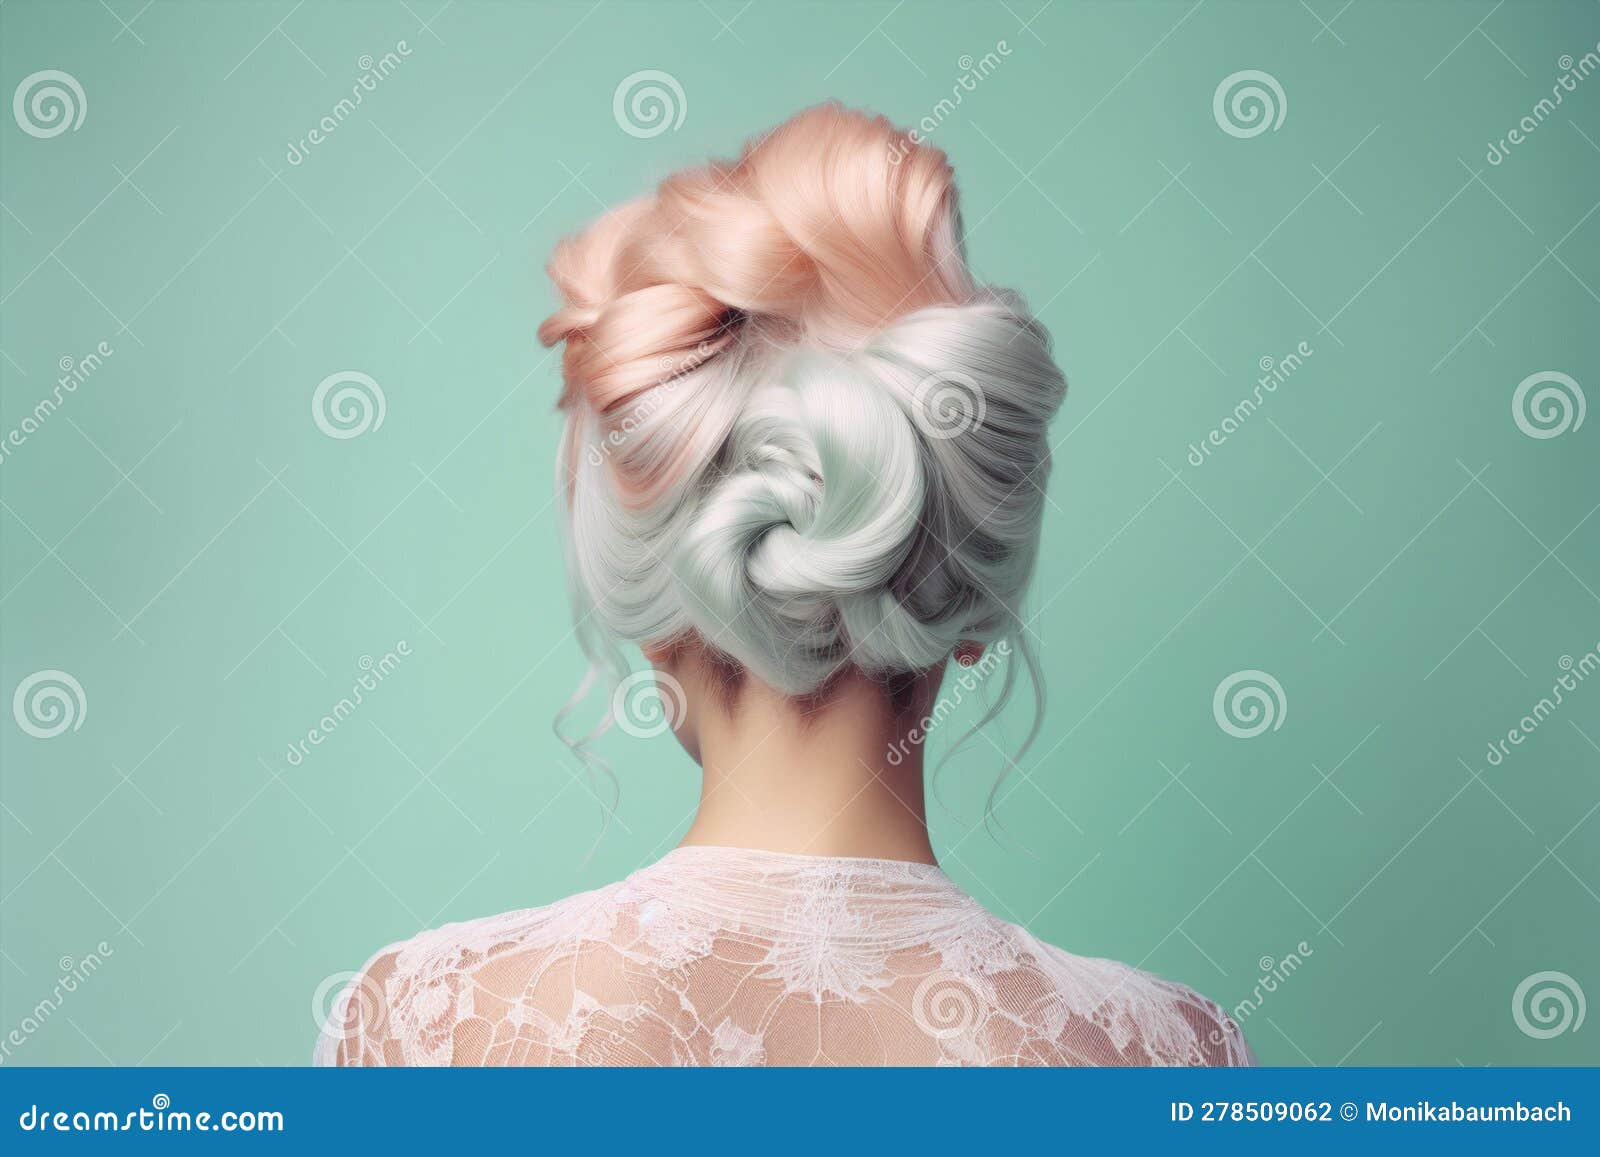 Pastel Blue and Pink Hair Care Routine - wide 8